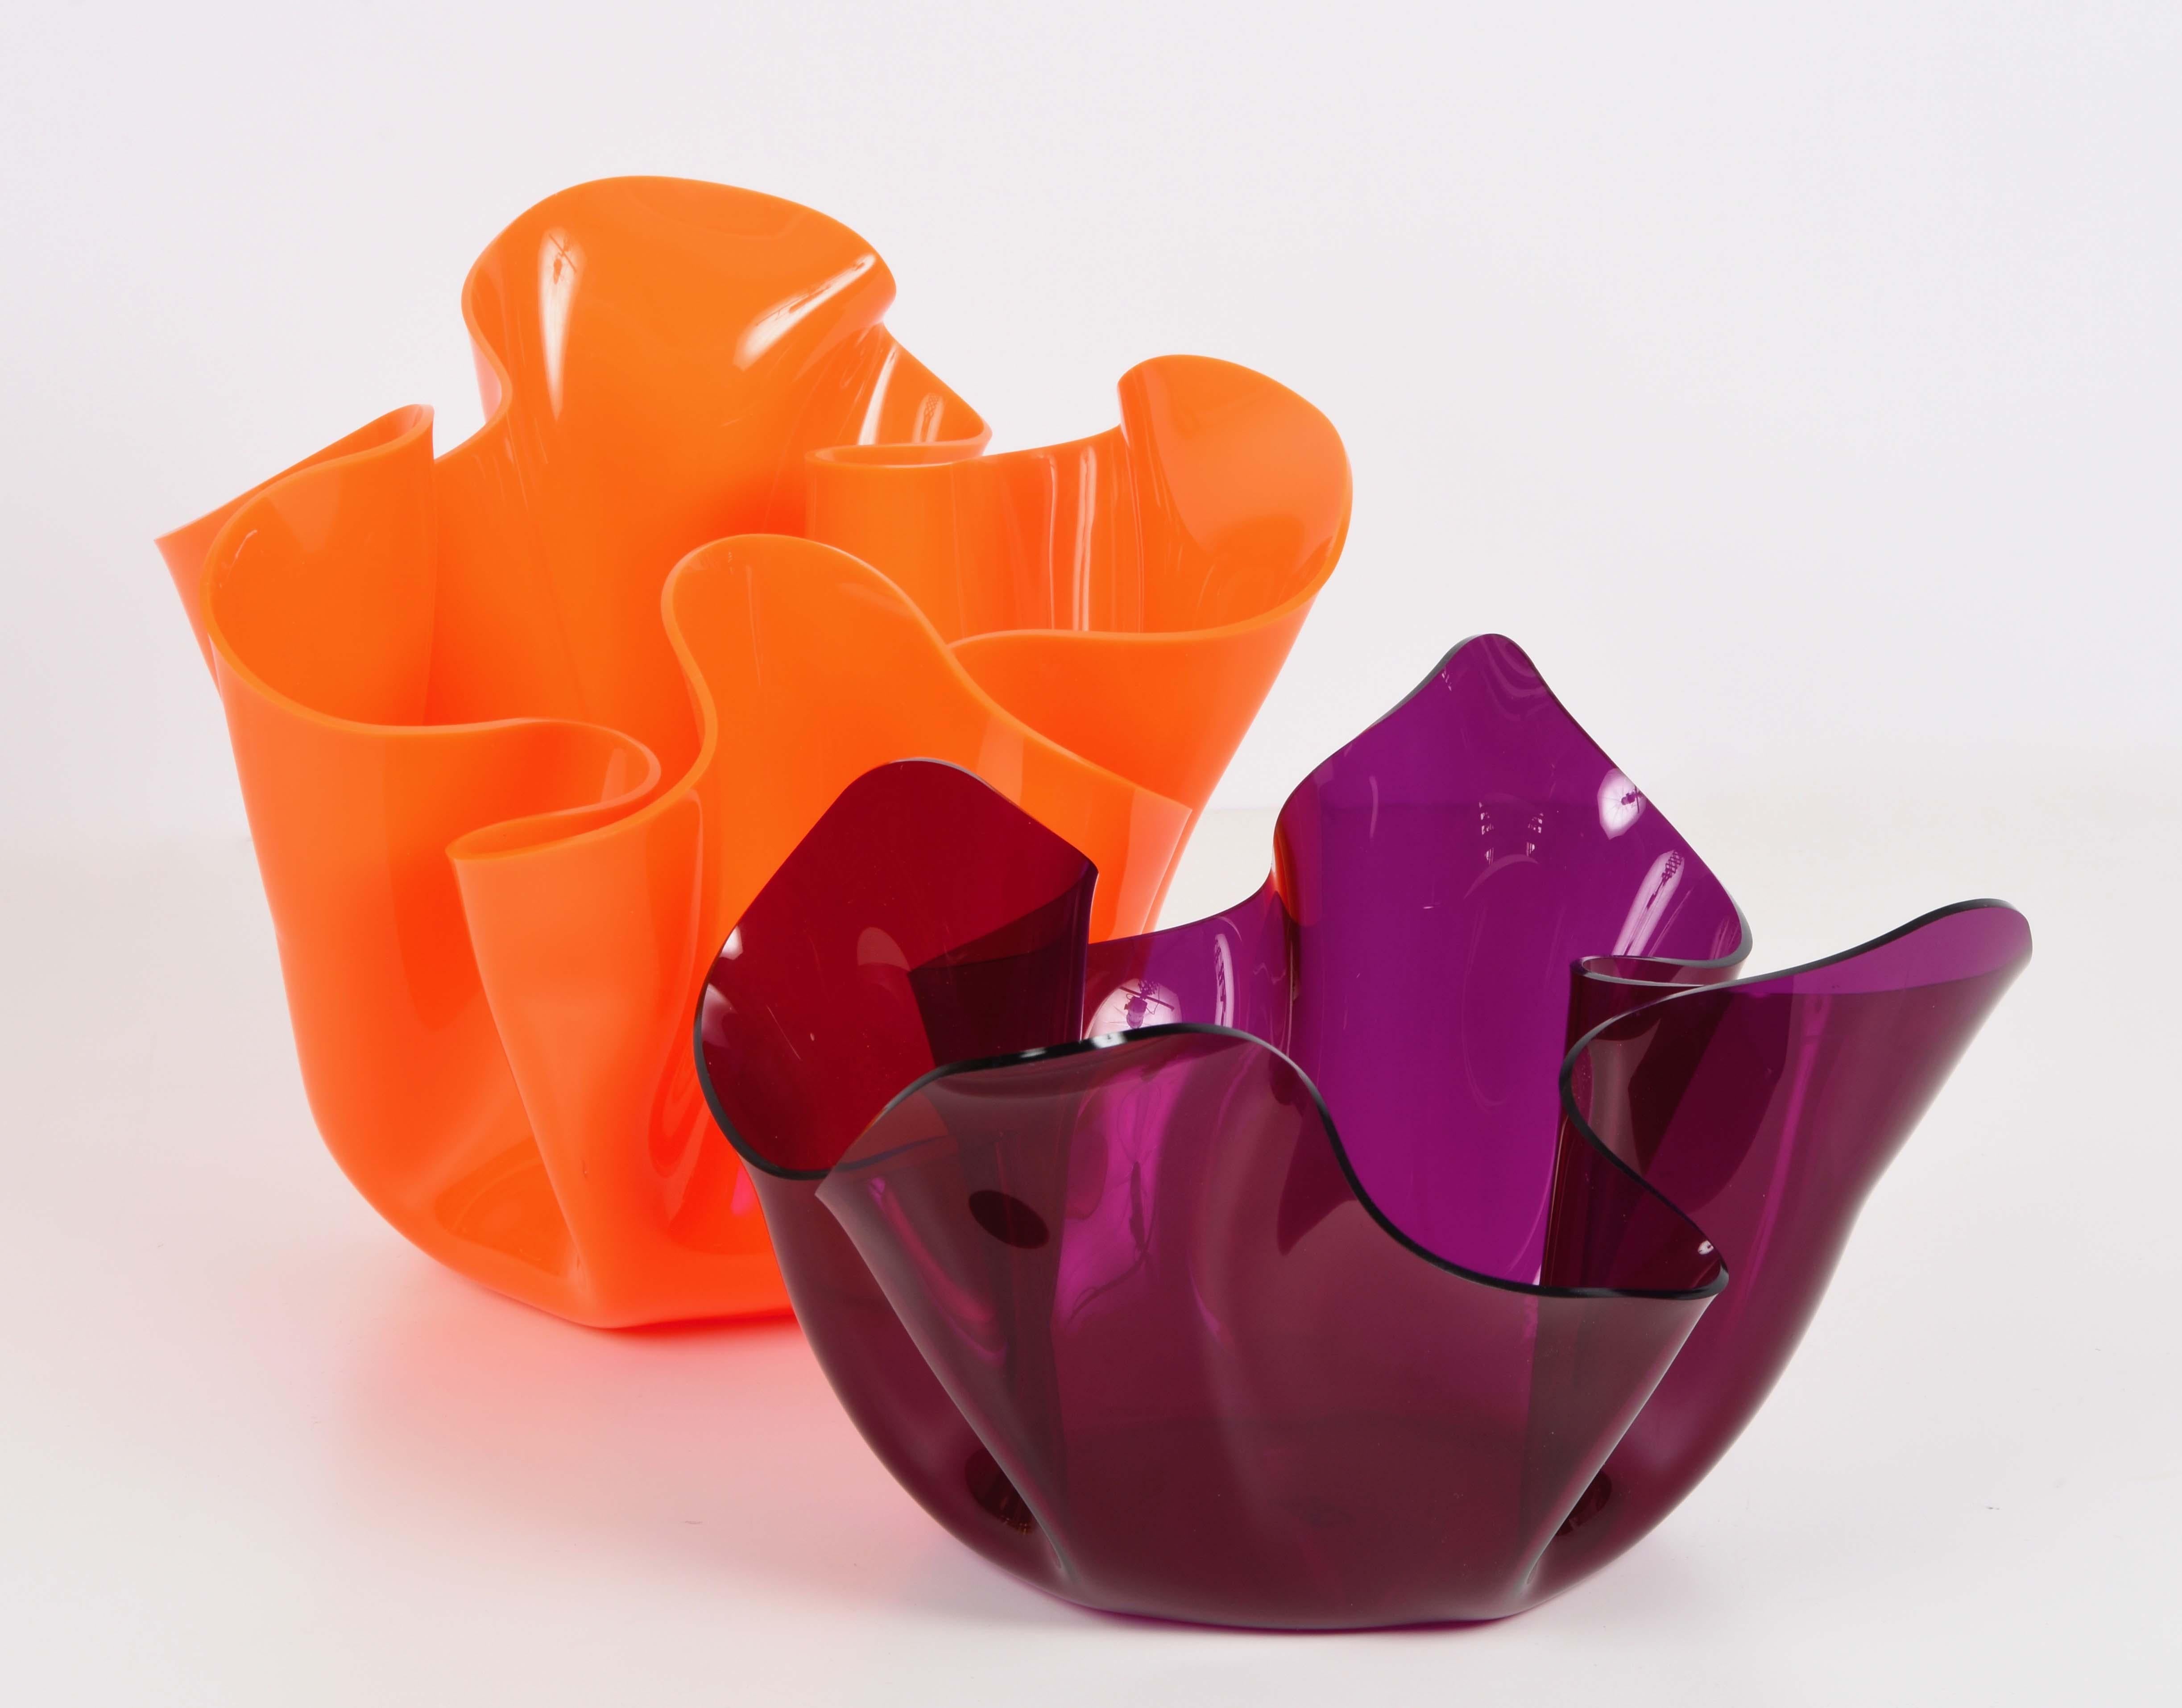 Pair of unique centerpieces in Lucite and plexiglass with original orange and purple shades. These amazing items were produced in Italy during 1970s by Guzzini, the most representative Italian brand for homeware.

These midcentury centerpieces